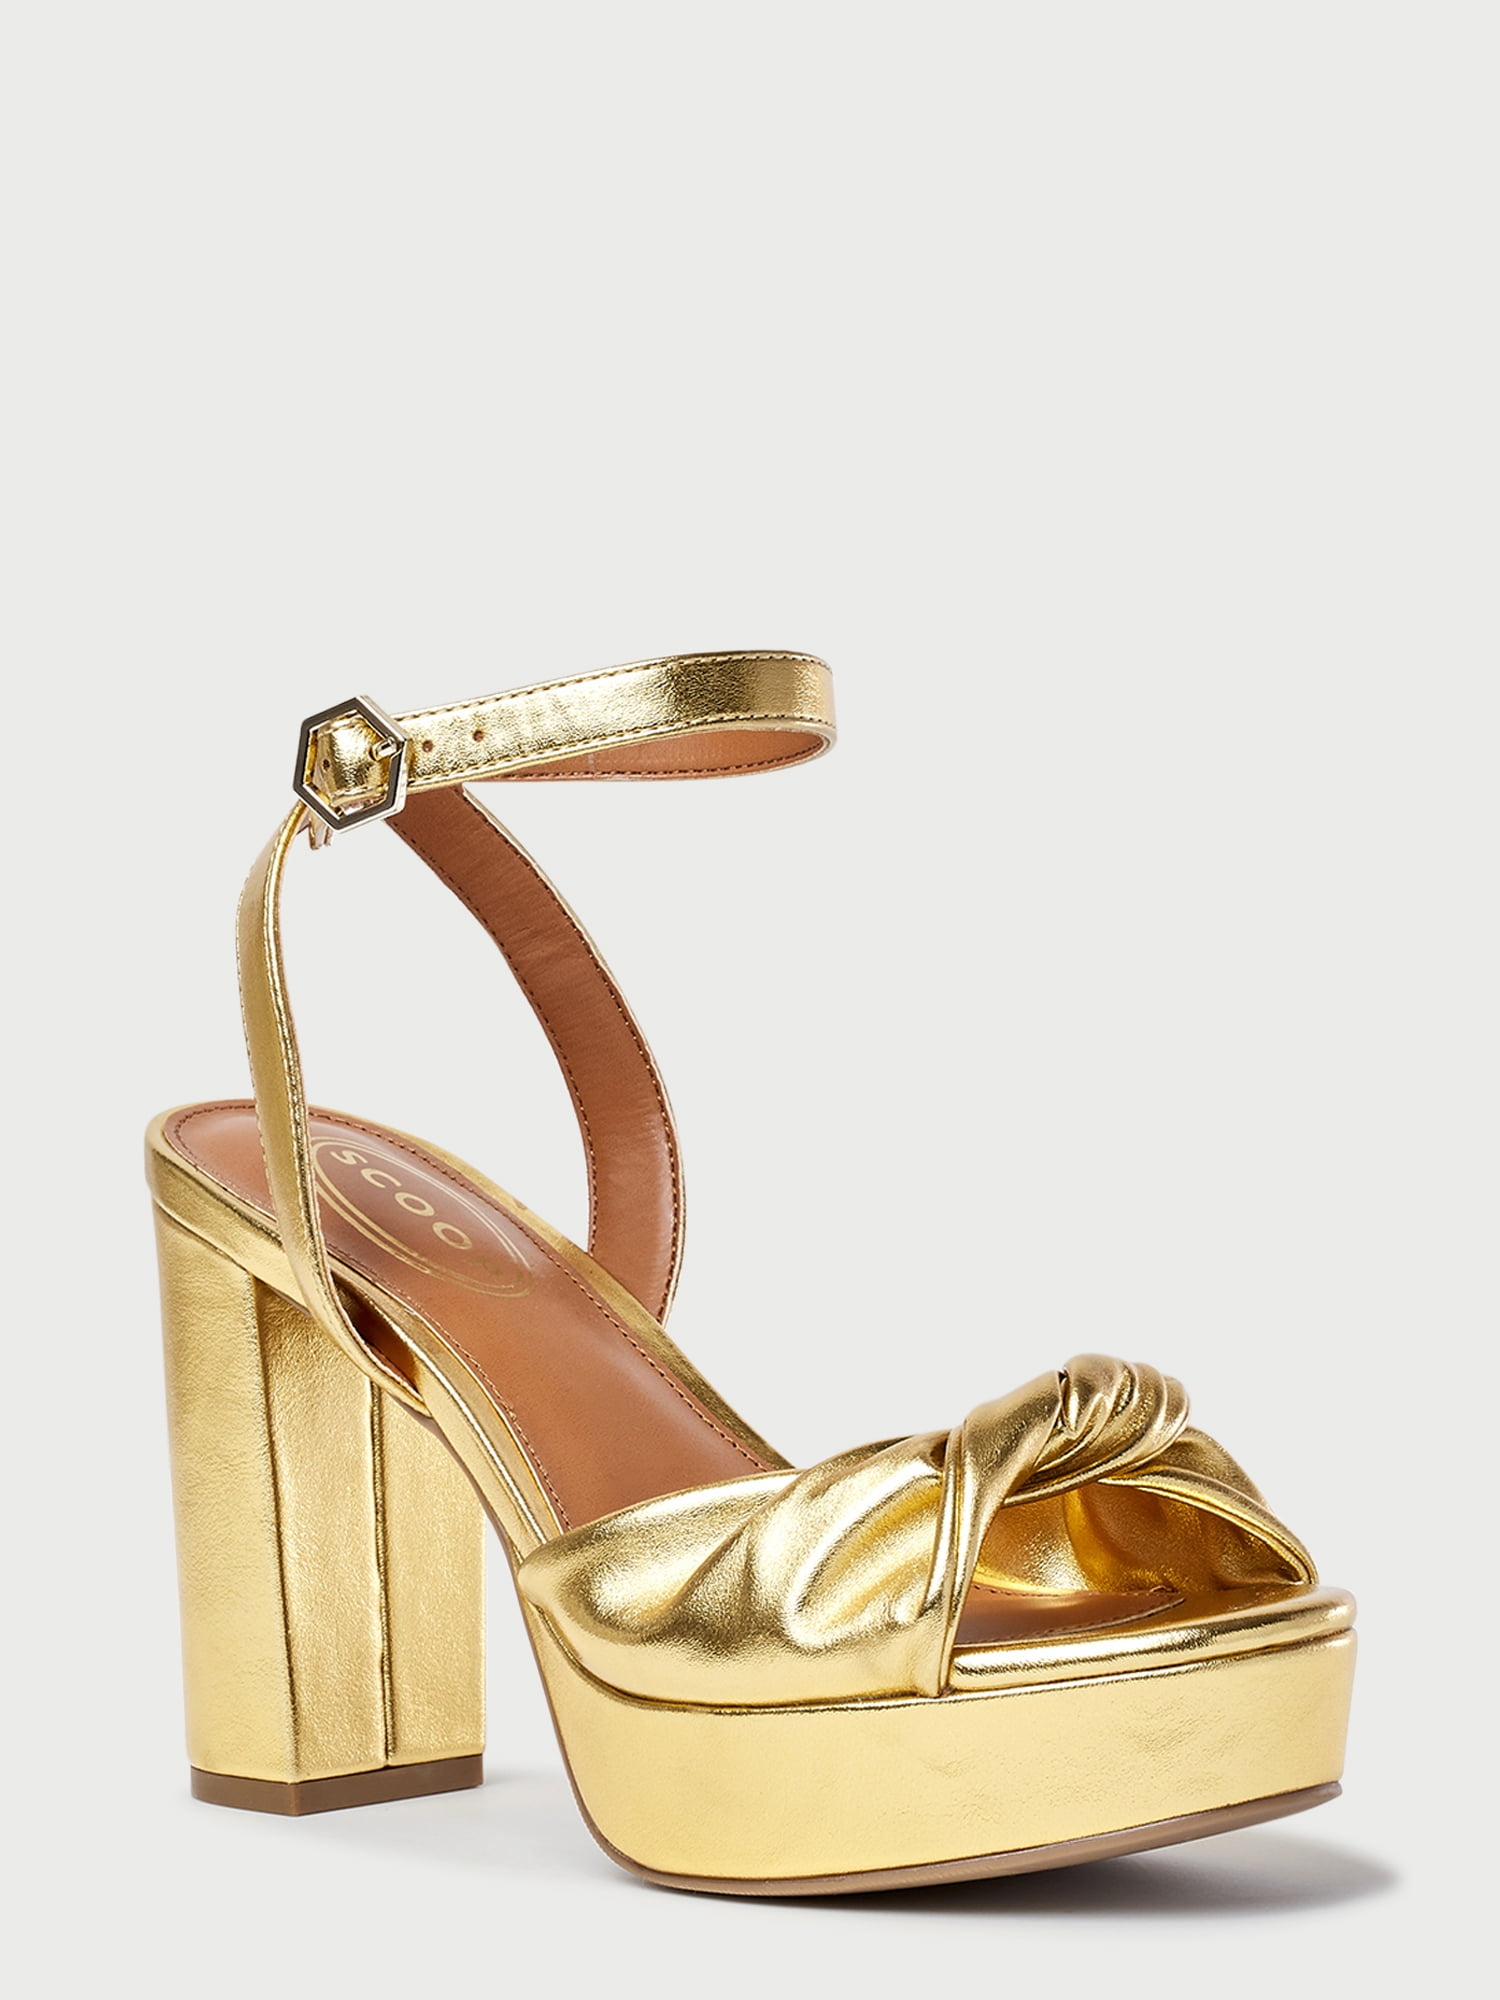 Gold 110 metallic-leather sandals | Gucci | MATCHES UK